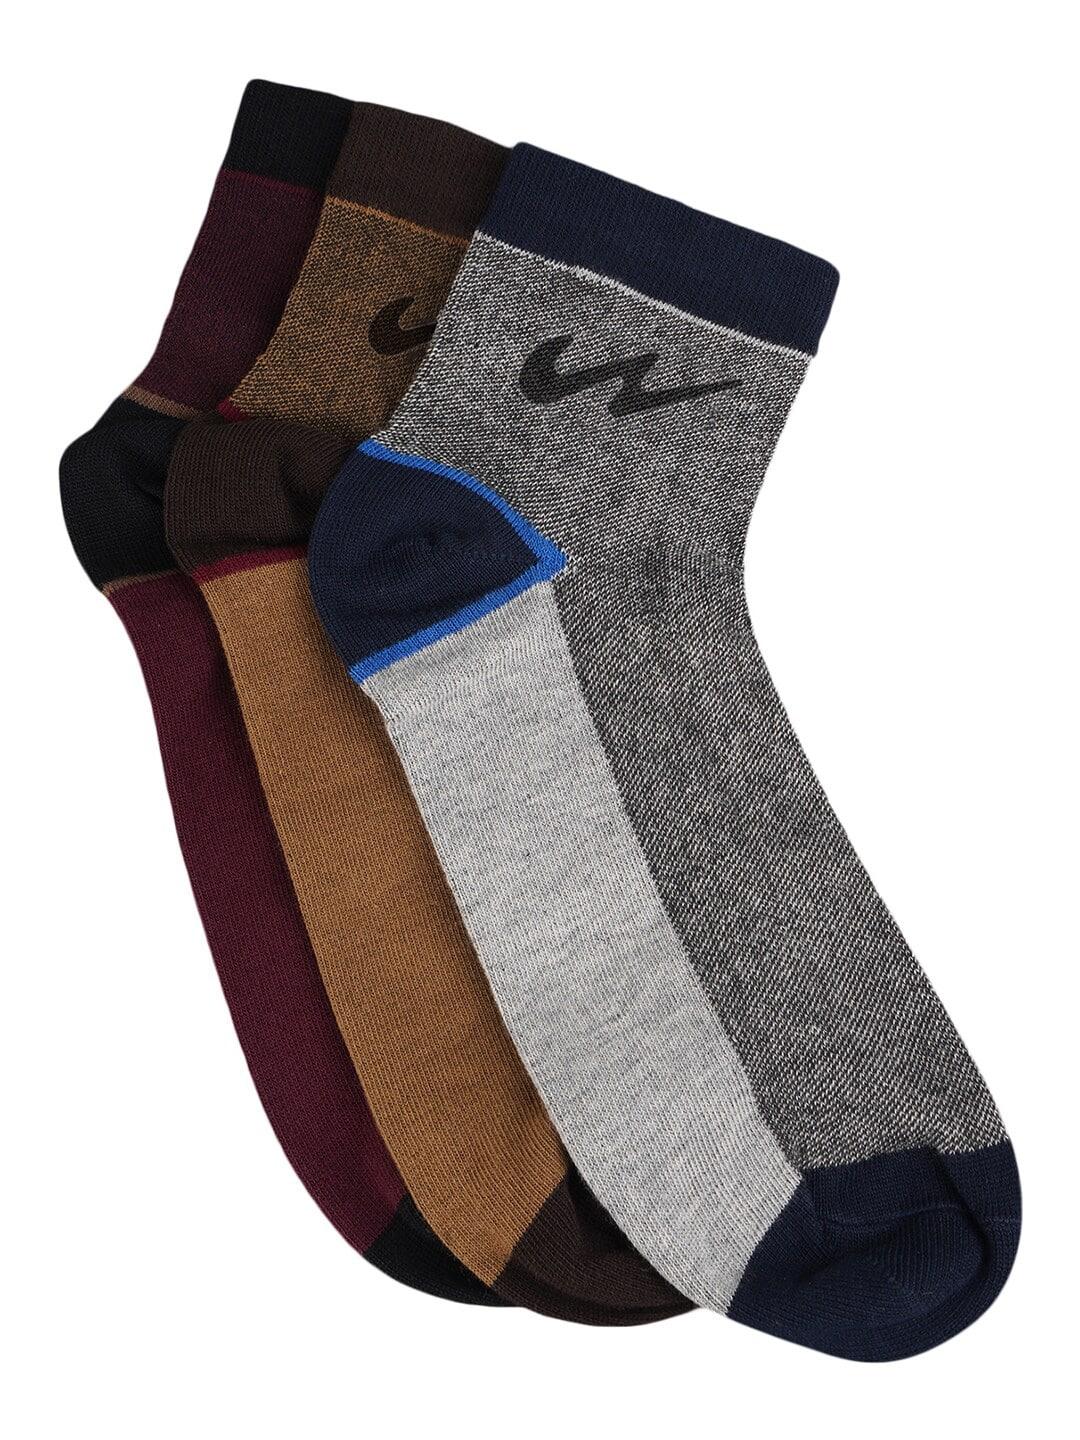 campus-pack-of-3-patterned-ankle-length-socks